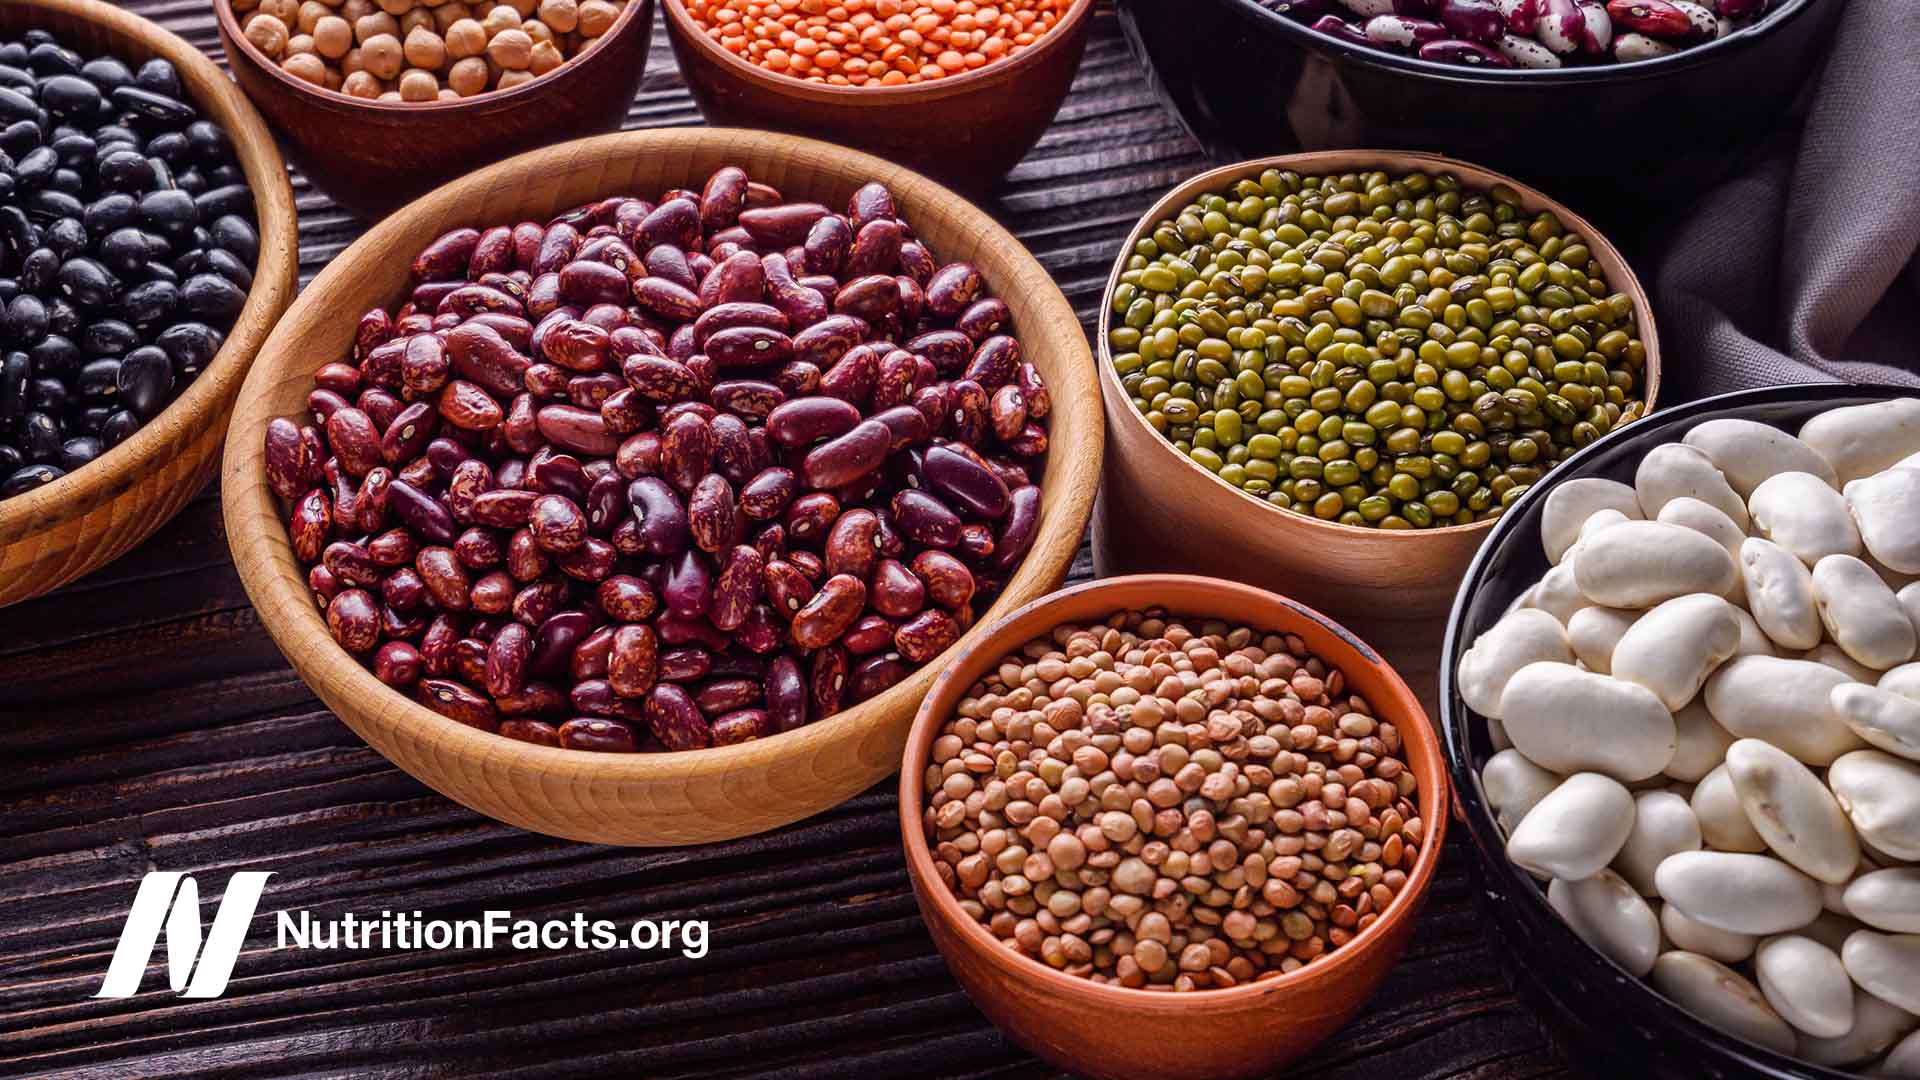 Cholesterol-lowering legumes and beans